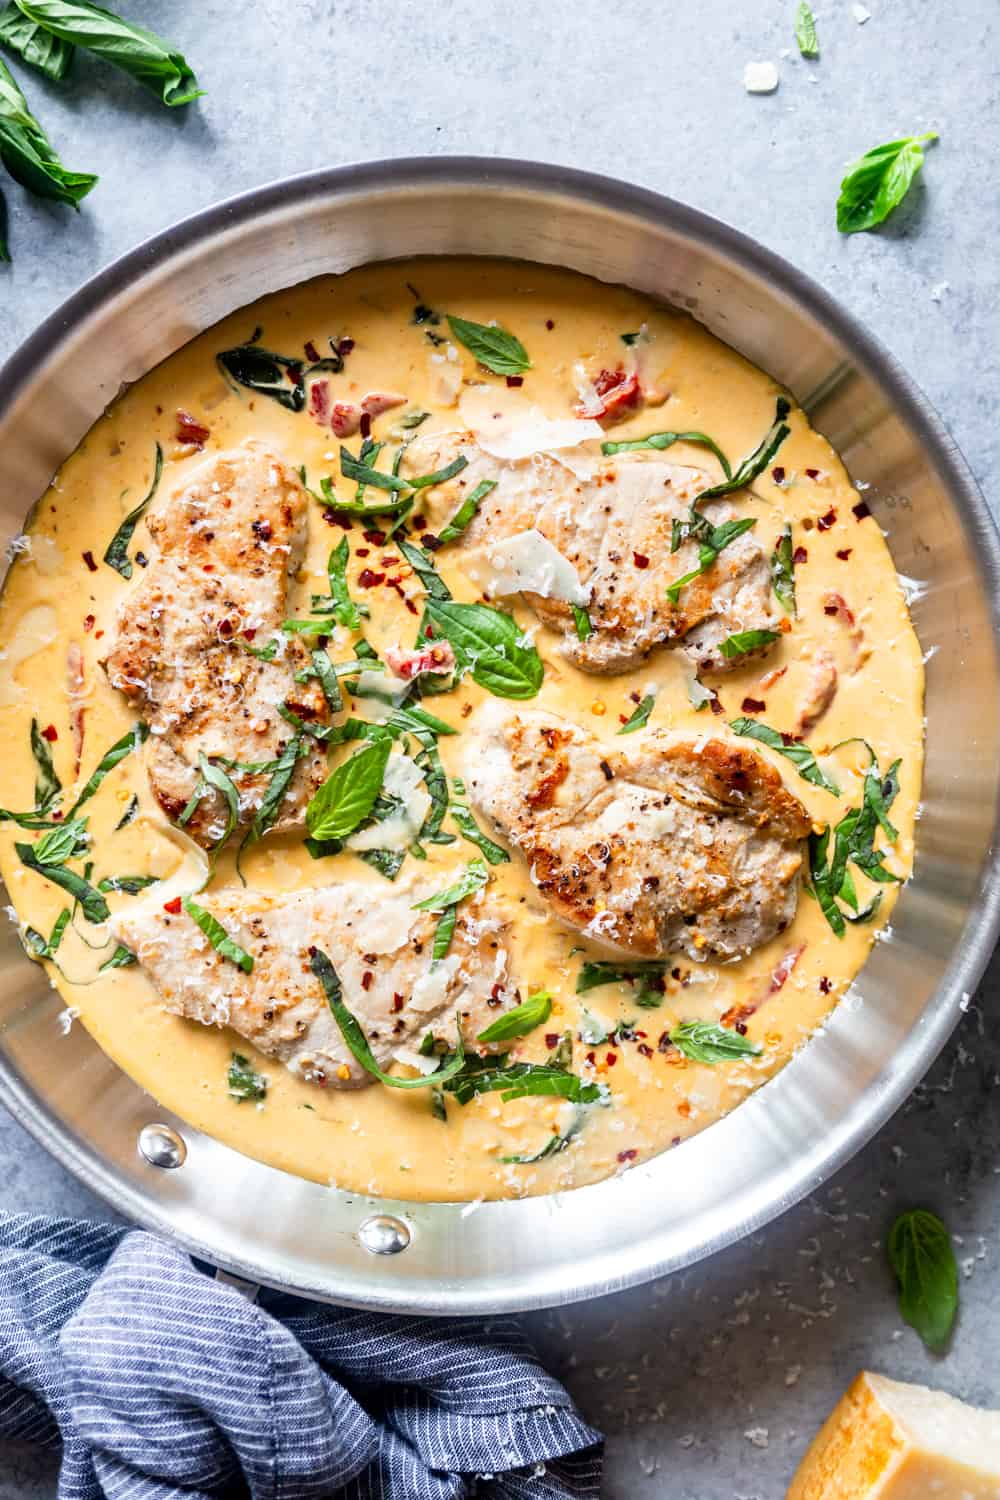 skillet with a creamy sauce and seared pork chops